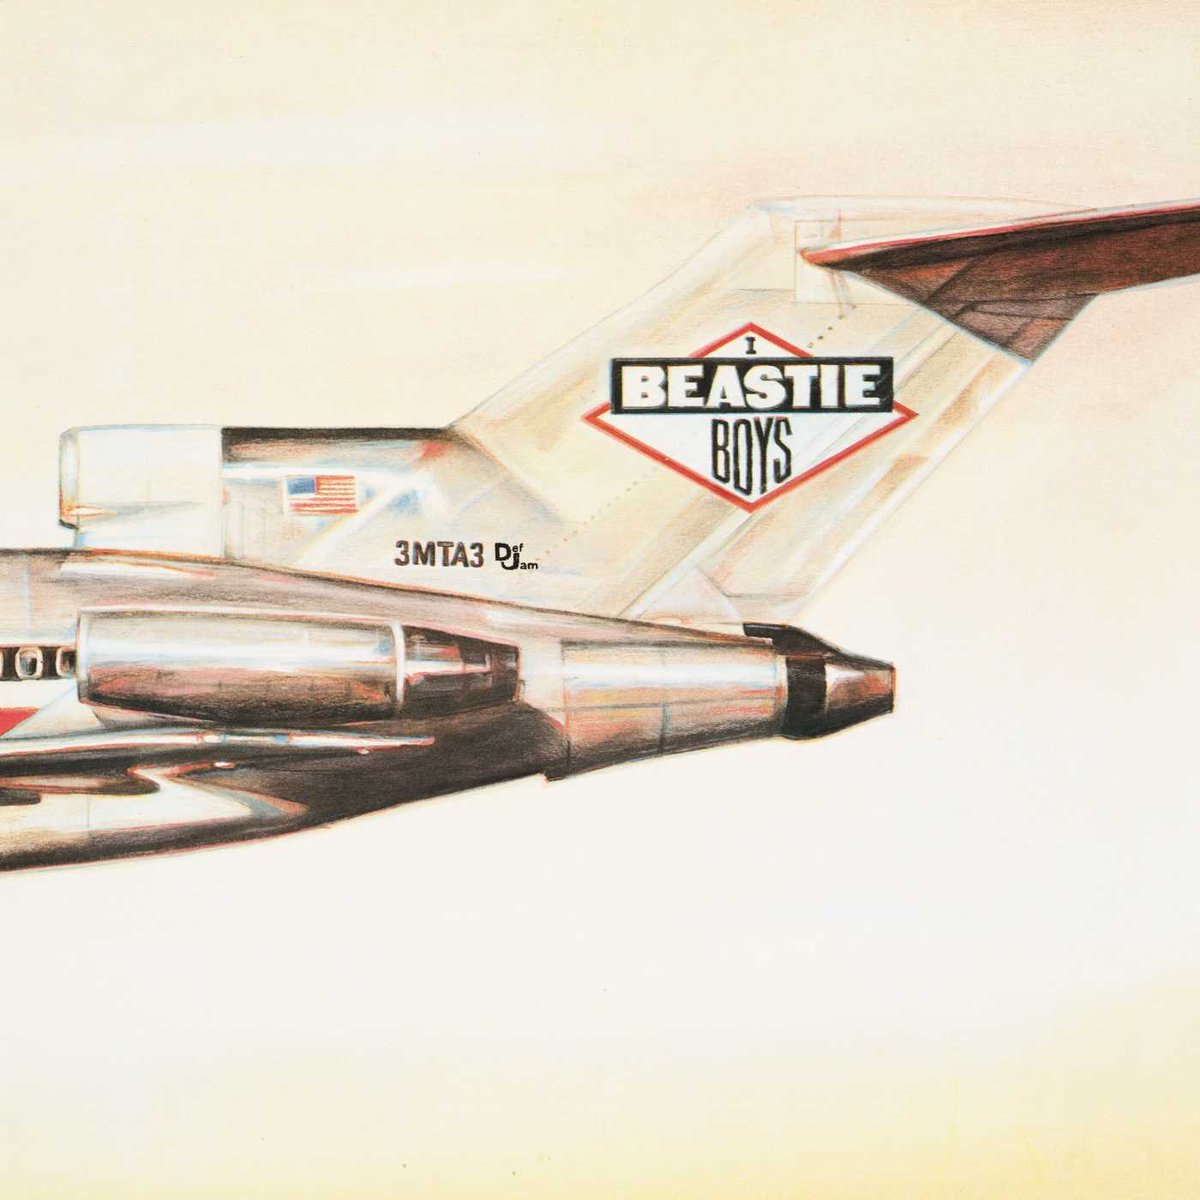 Licensed To Ill by Beastie Boys was the #1 album on the charts today in 1987. #80s #80smusic #1980s